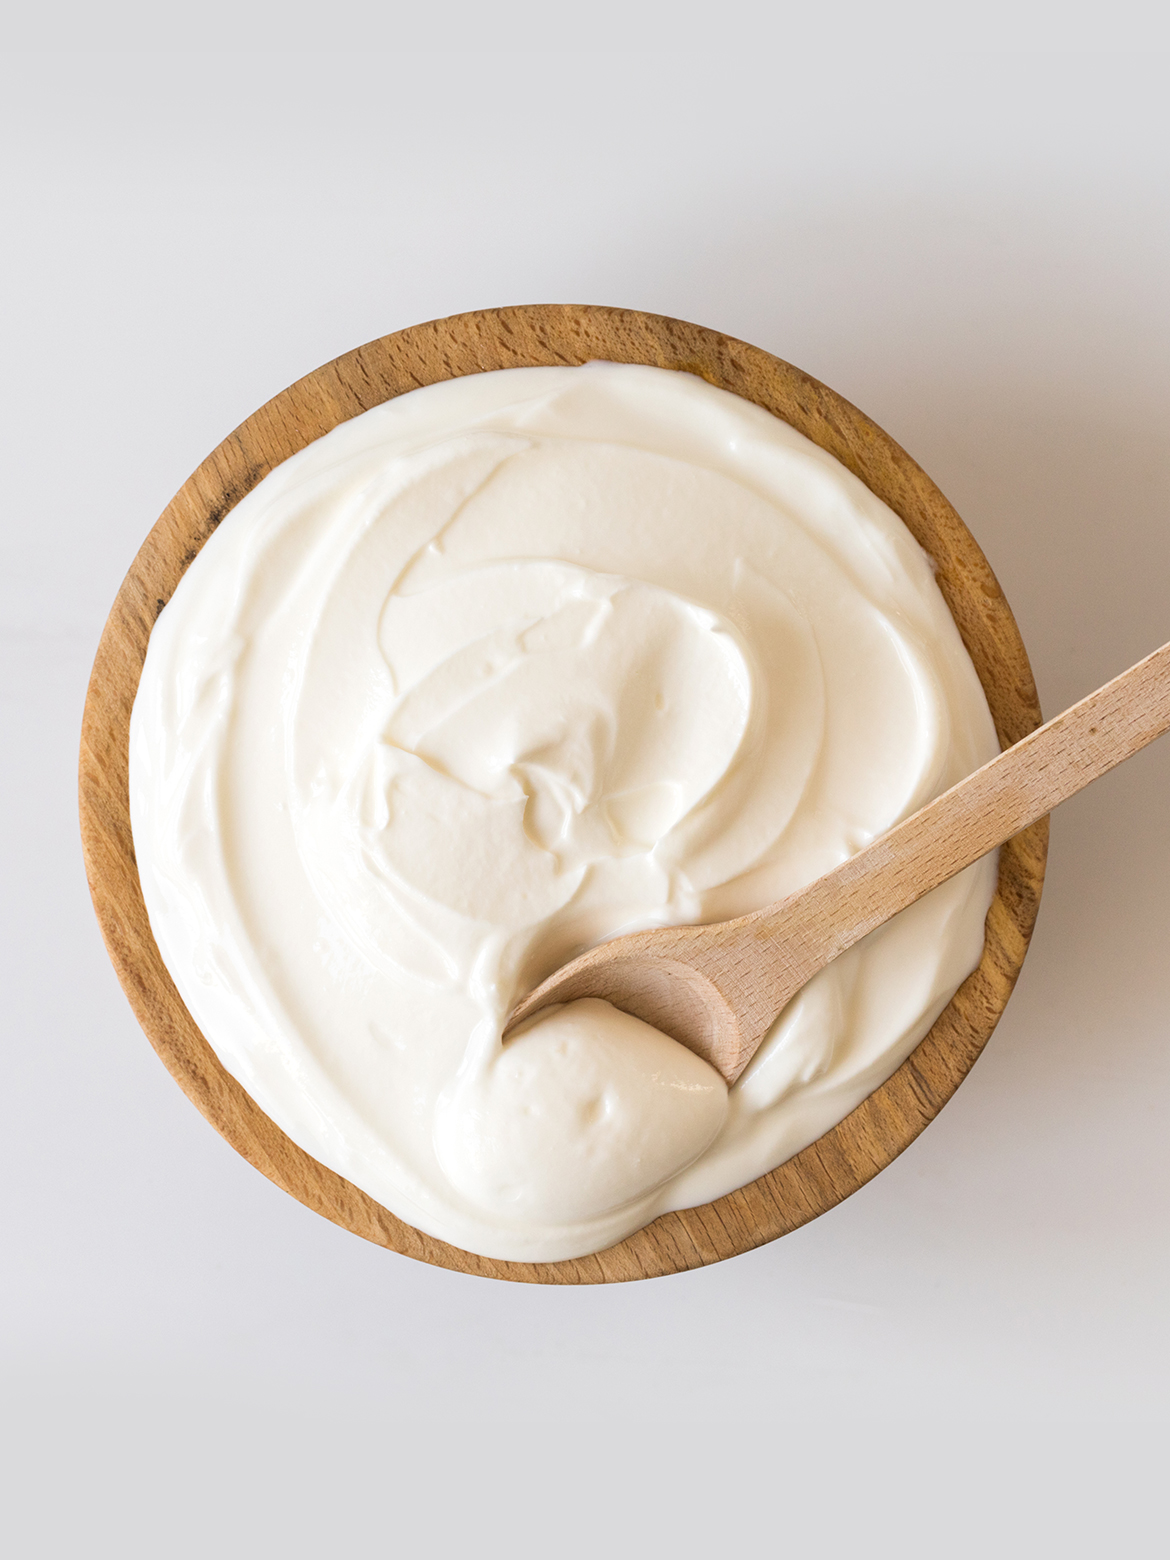 Benefits Of Curd For Hair And DIY Hair Masks | Femina.in